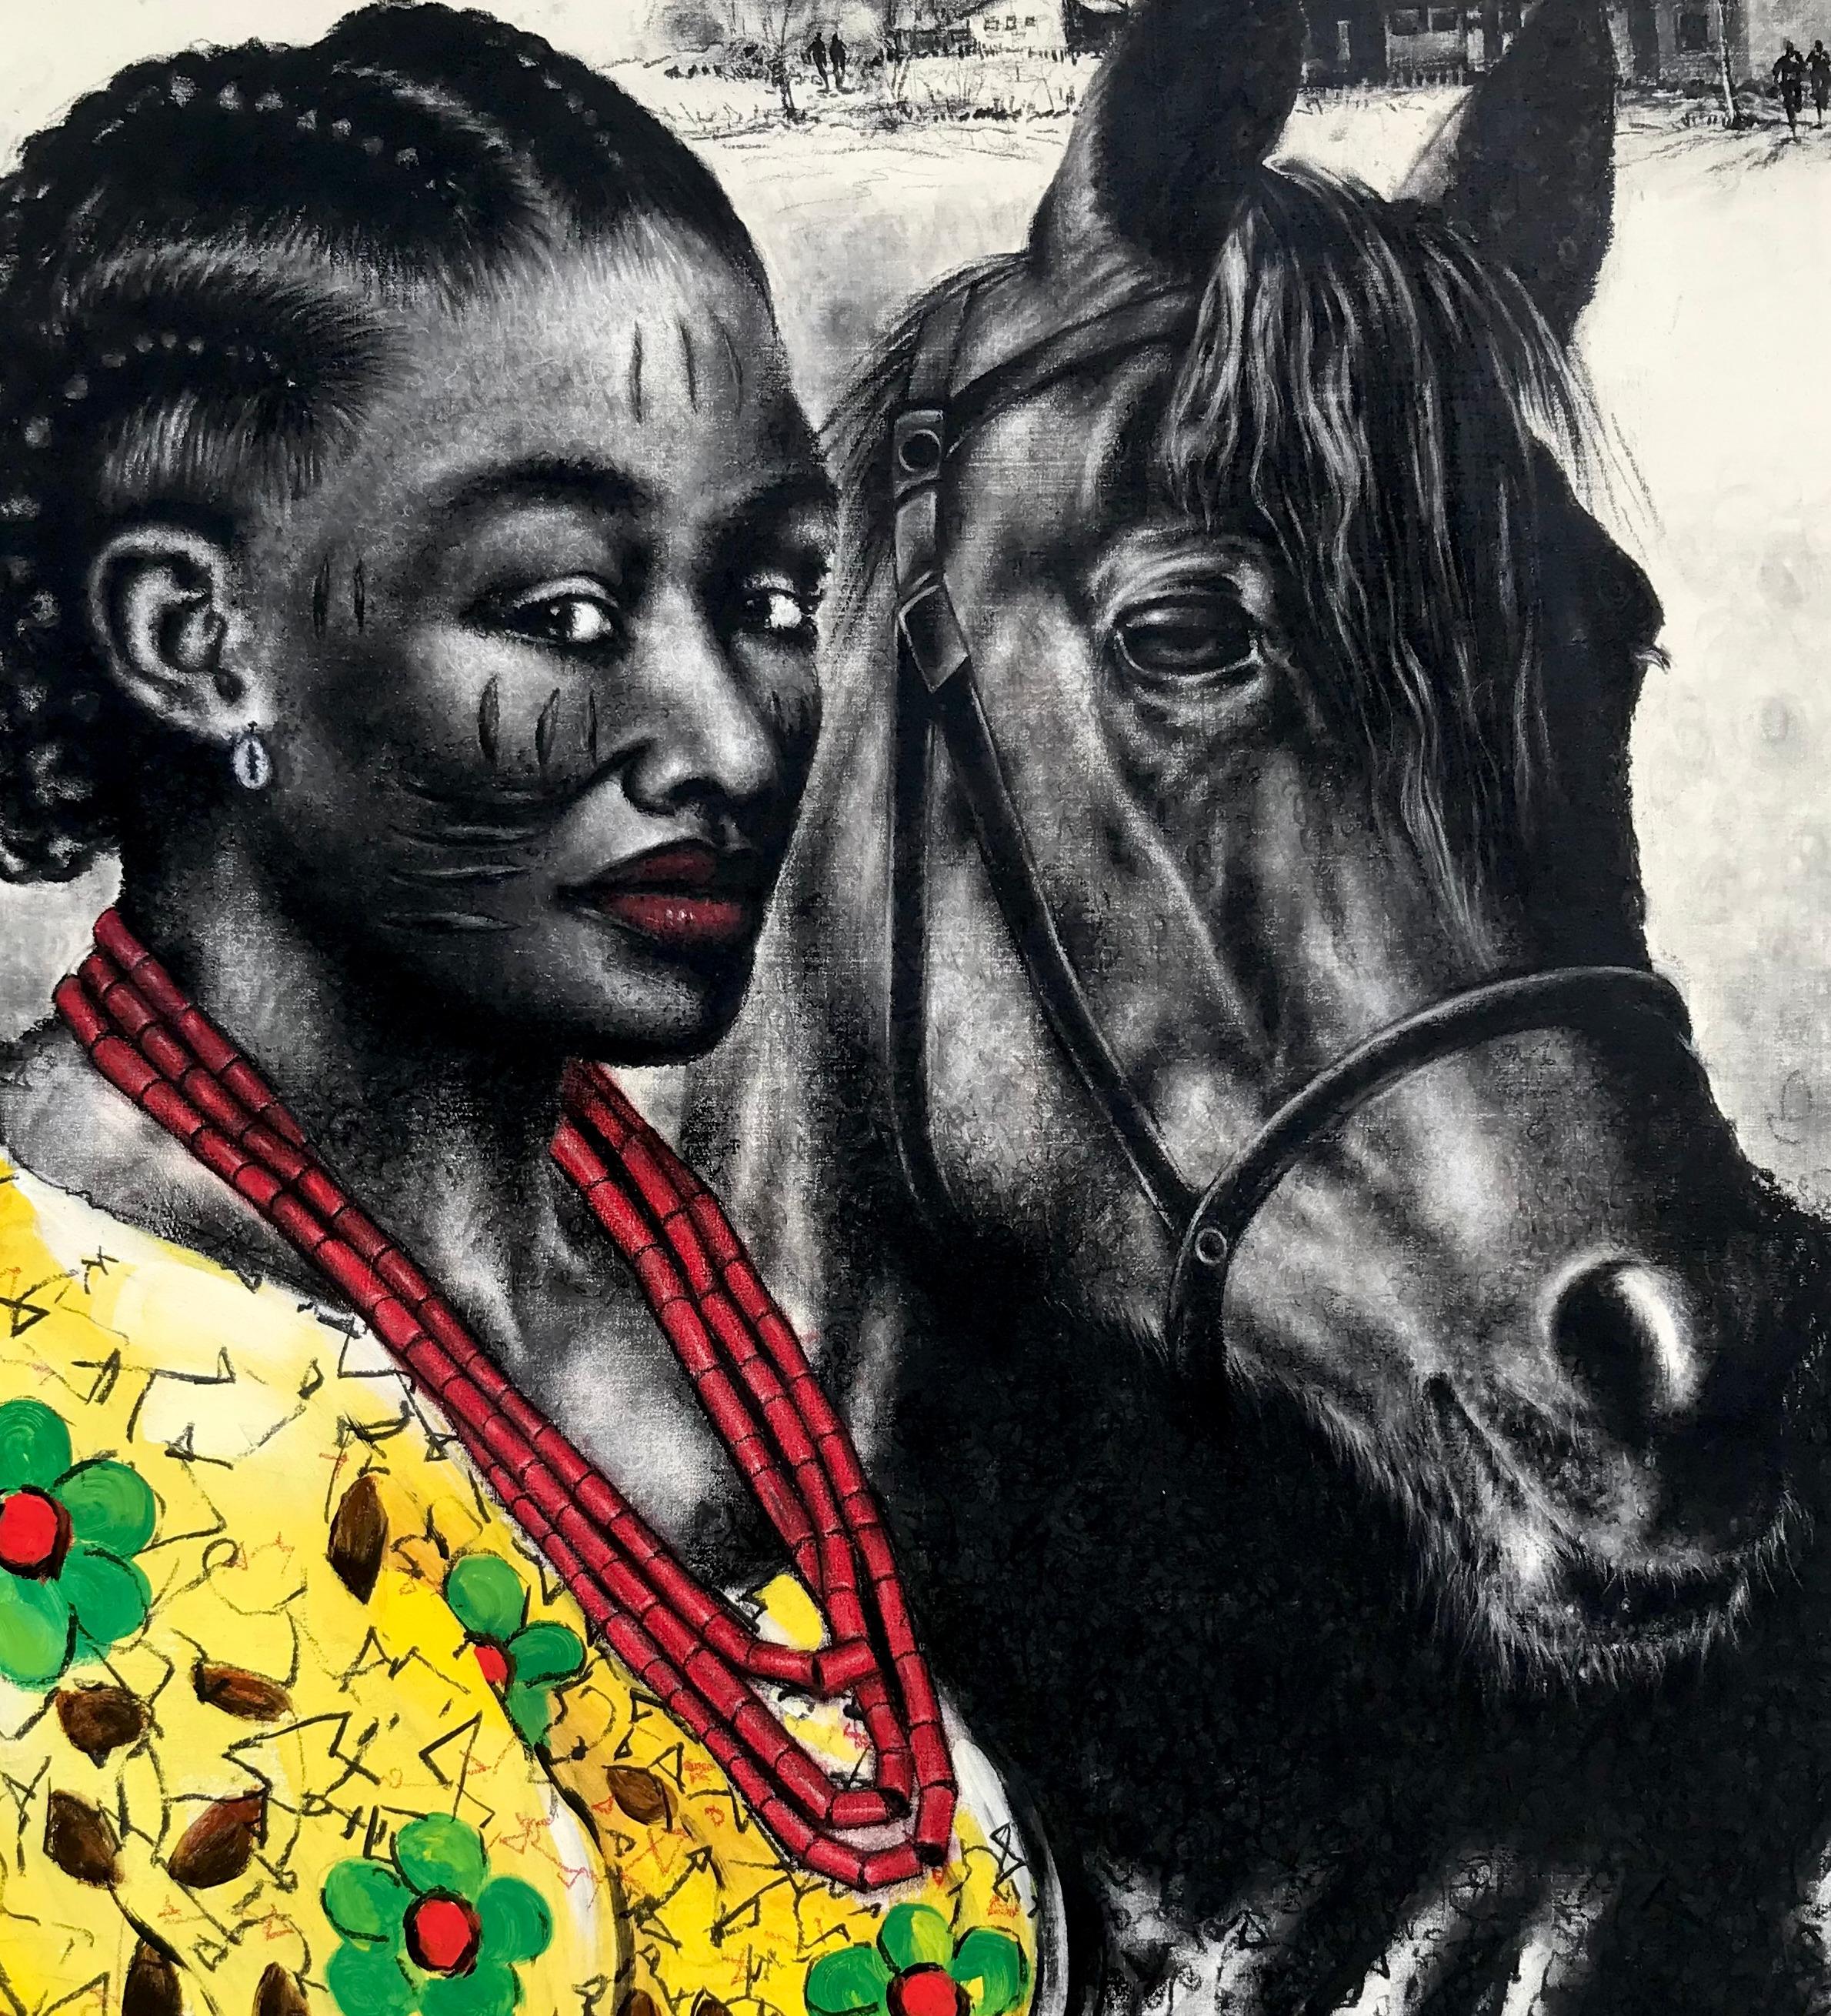 The drawings showcase the beauty of the black women on one hand and also reflect the intimacy animals possess with females, especially horses, and princesses in royalty. They are much more comfortable, endure hardships, and well behaved with women